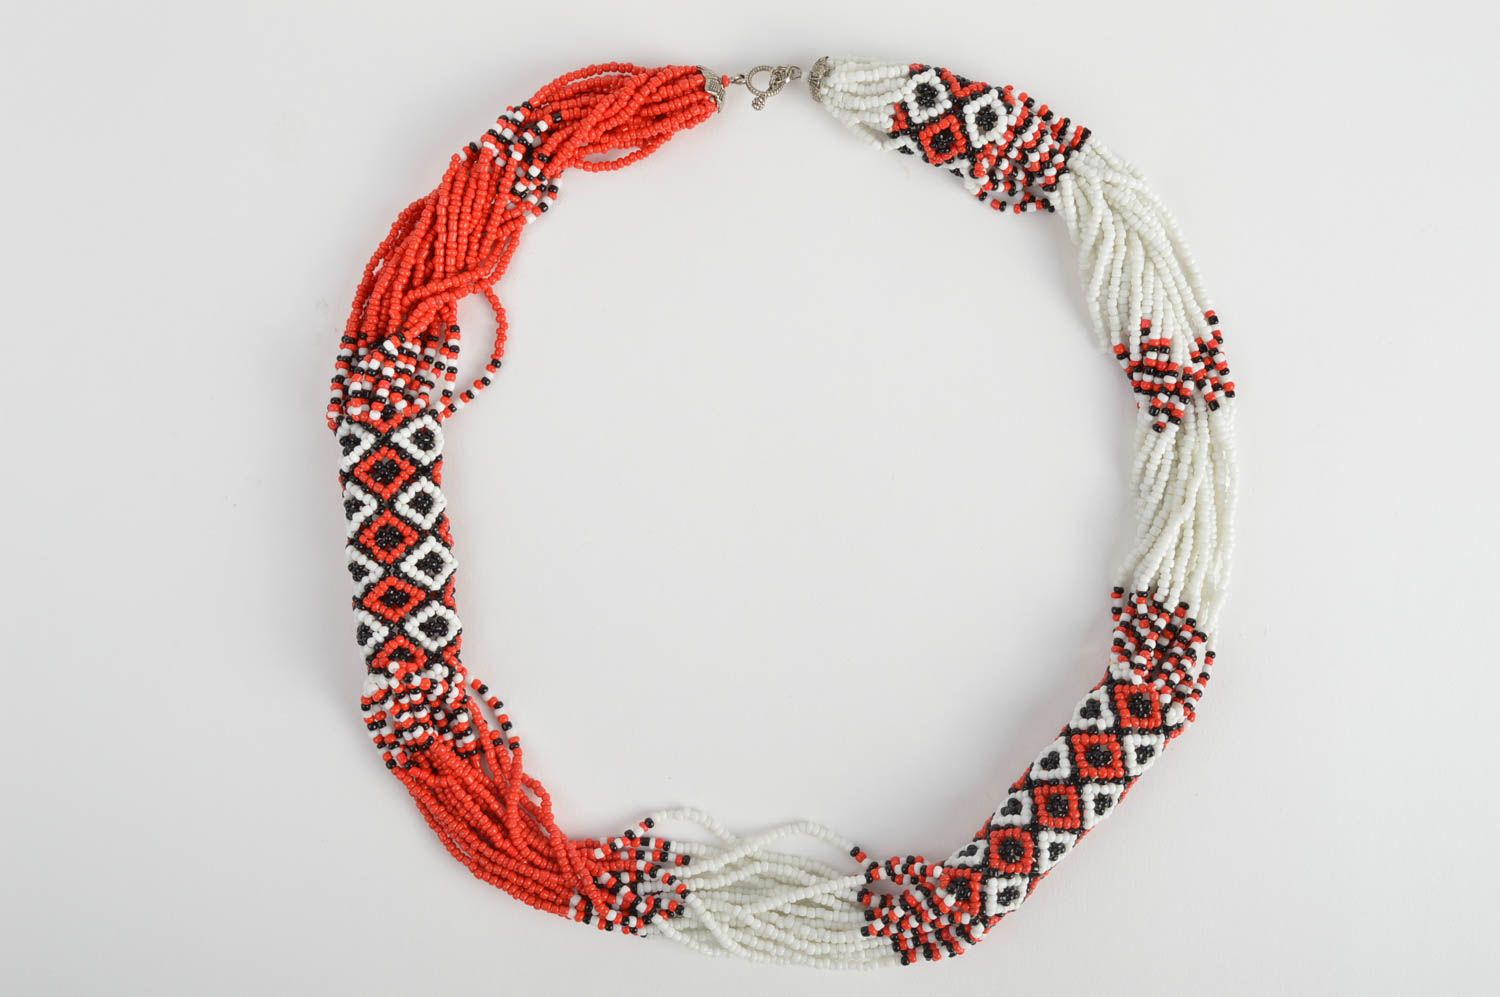 Handmade massive women's red and white beaded cord necklace with ethnic ornament photo 2